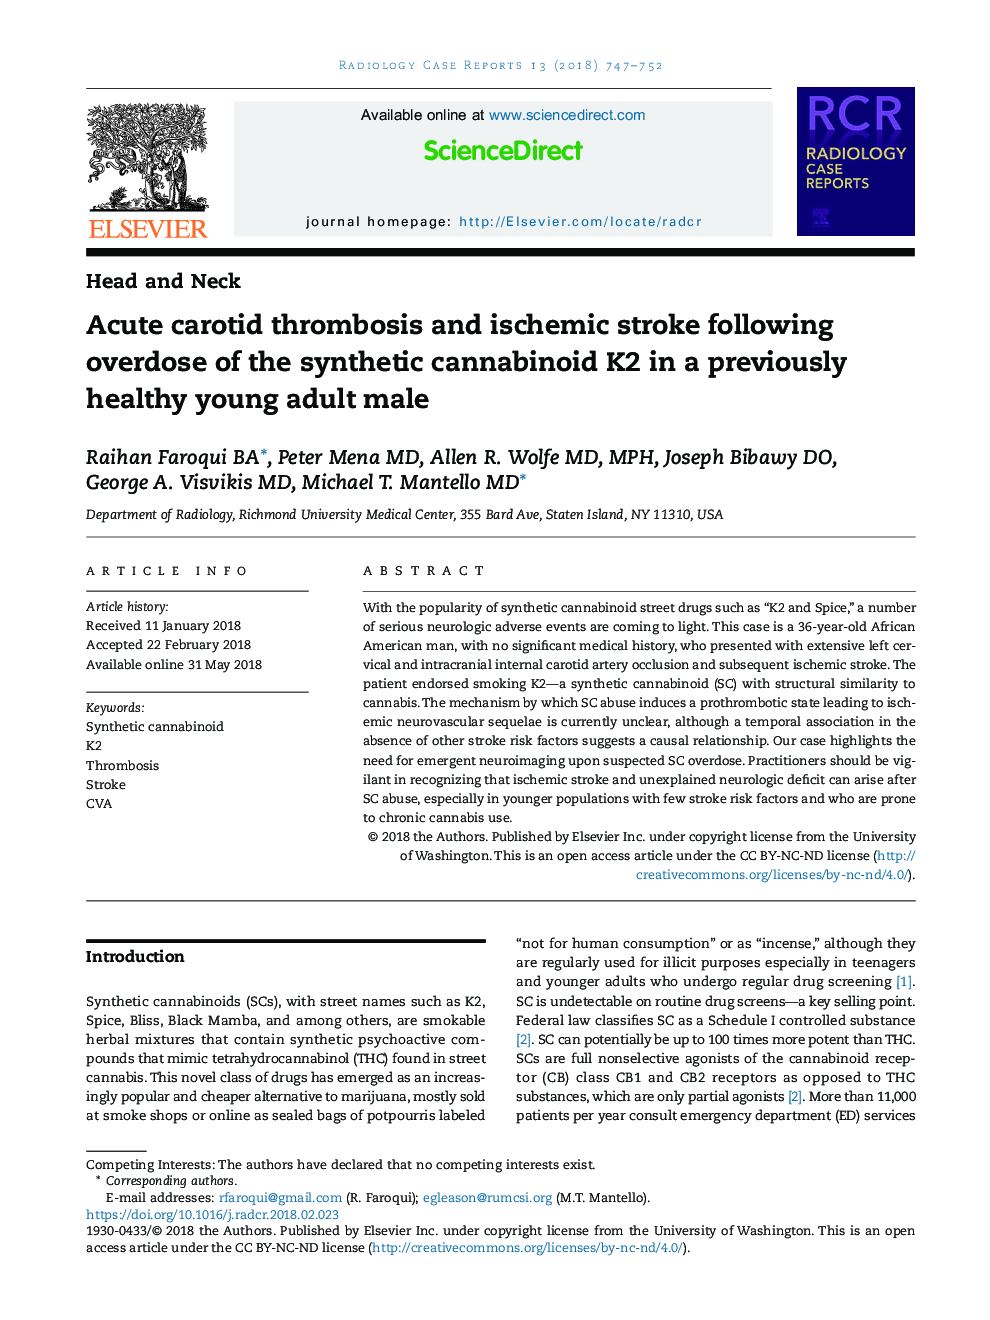 Acute carotid thrombosis and ischemic stroke following overdose of the synthetic cannabinoid K2 in a previously healthy young adult male